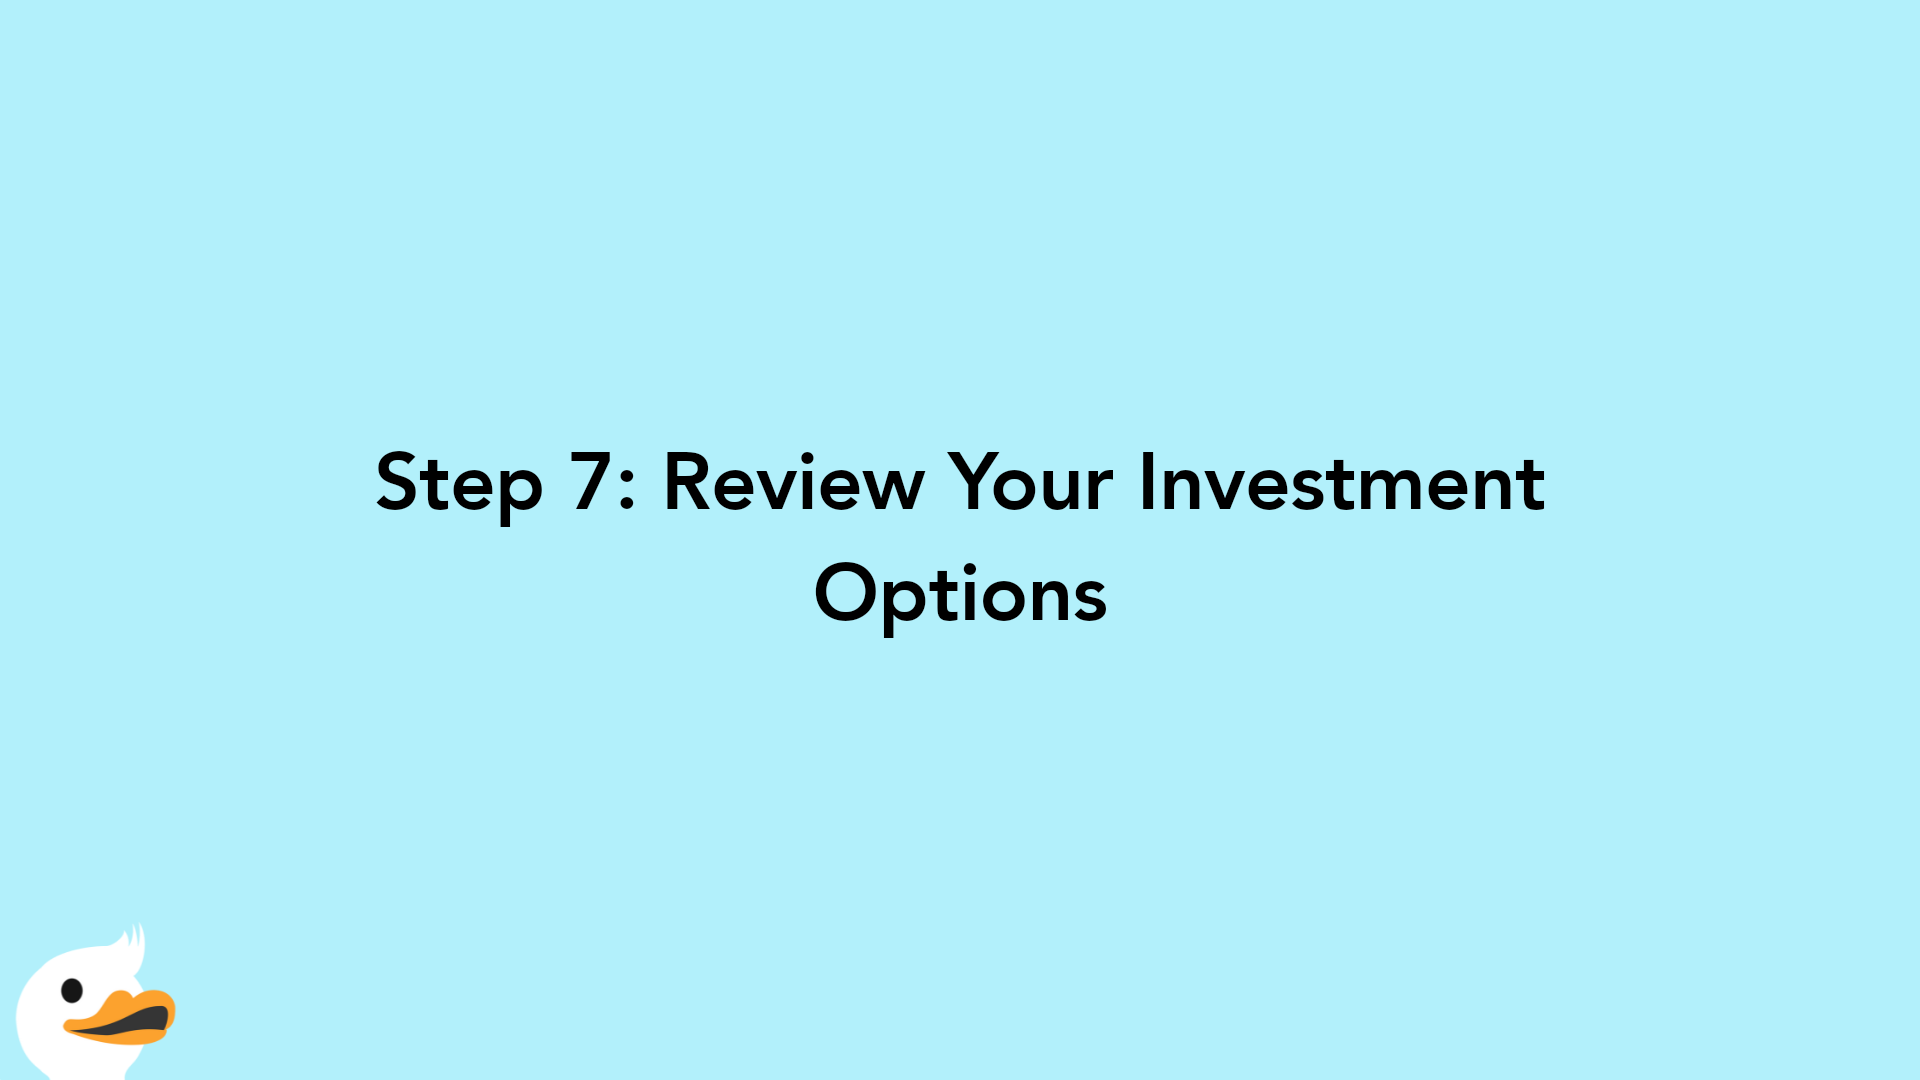 Step 7: Review Your Investment Options